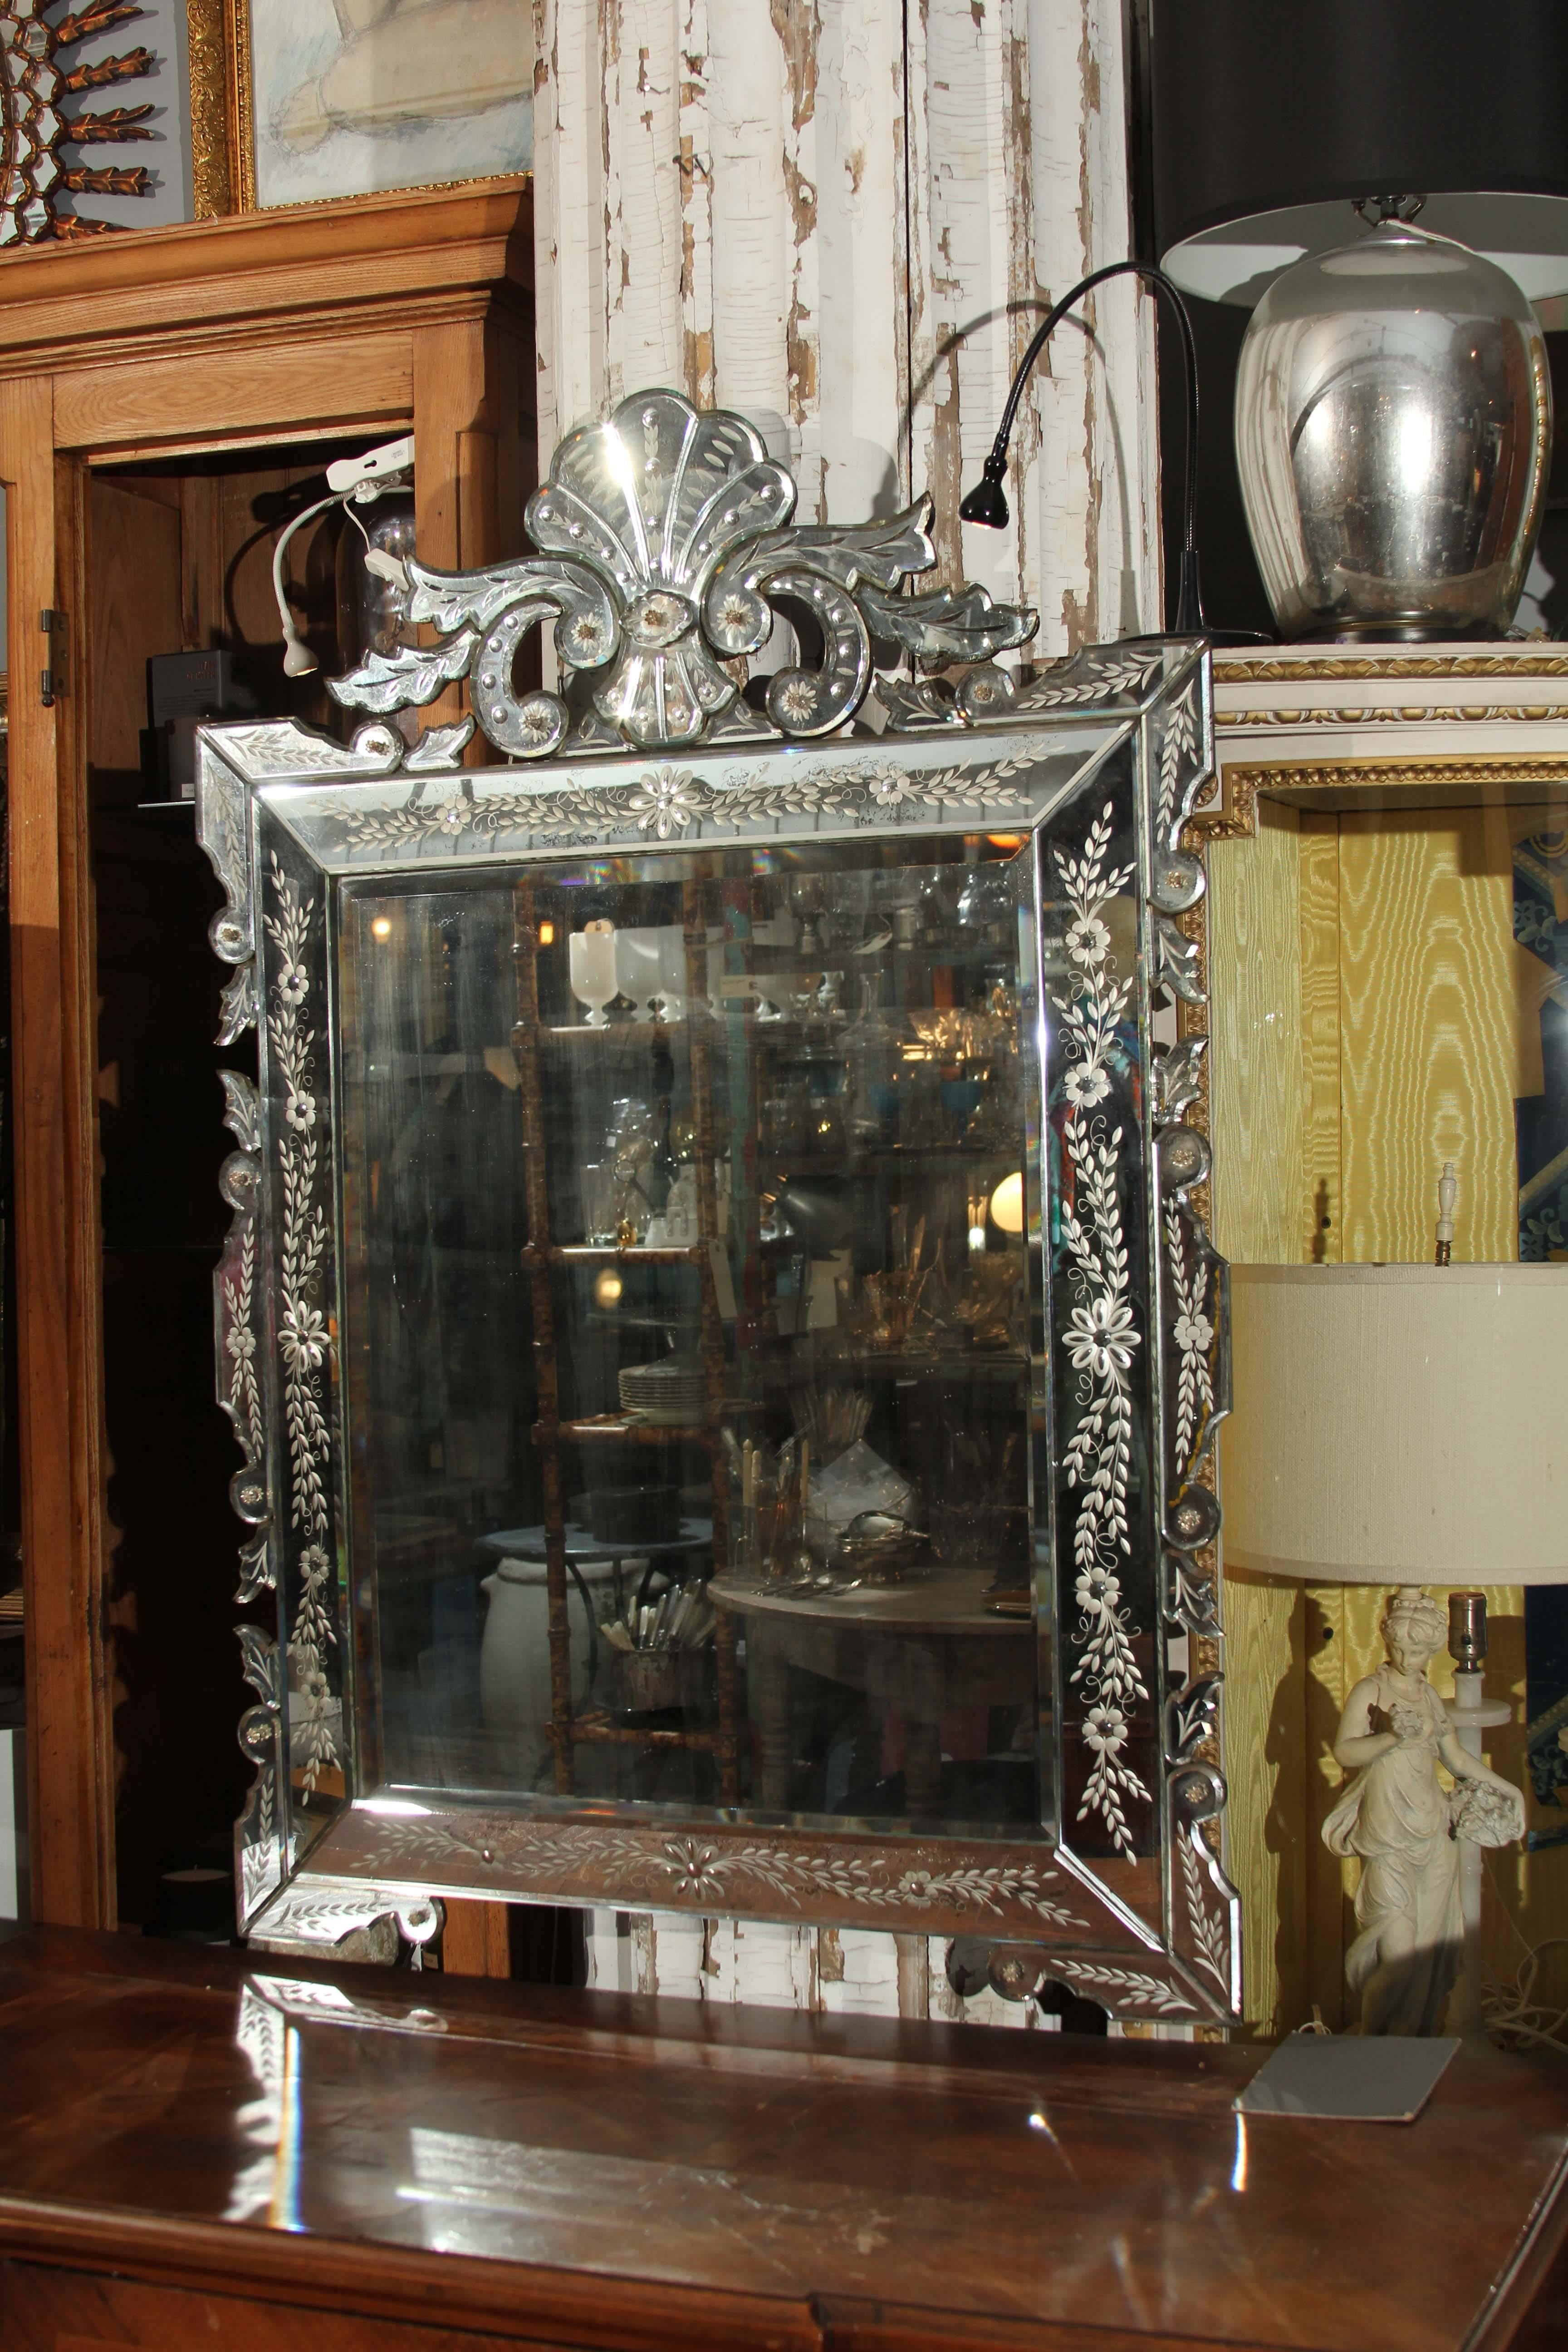 Rectangular Venetian mirror with shell and flourishes on crown.